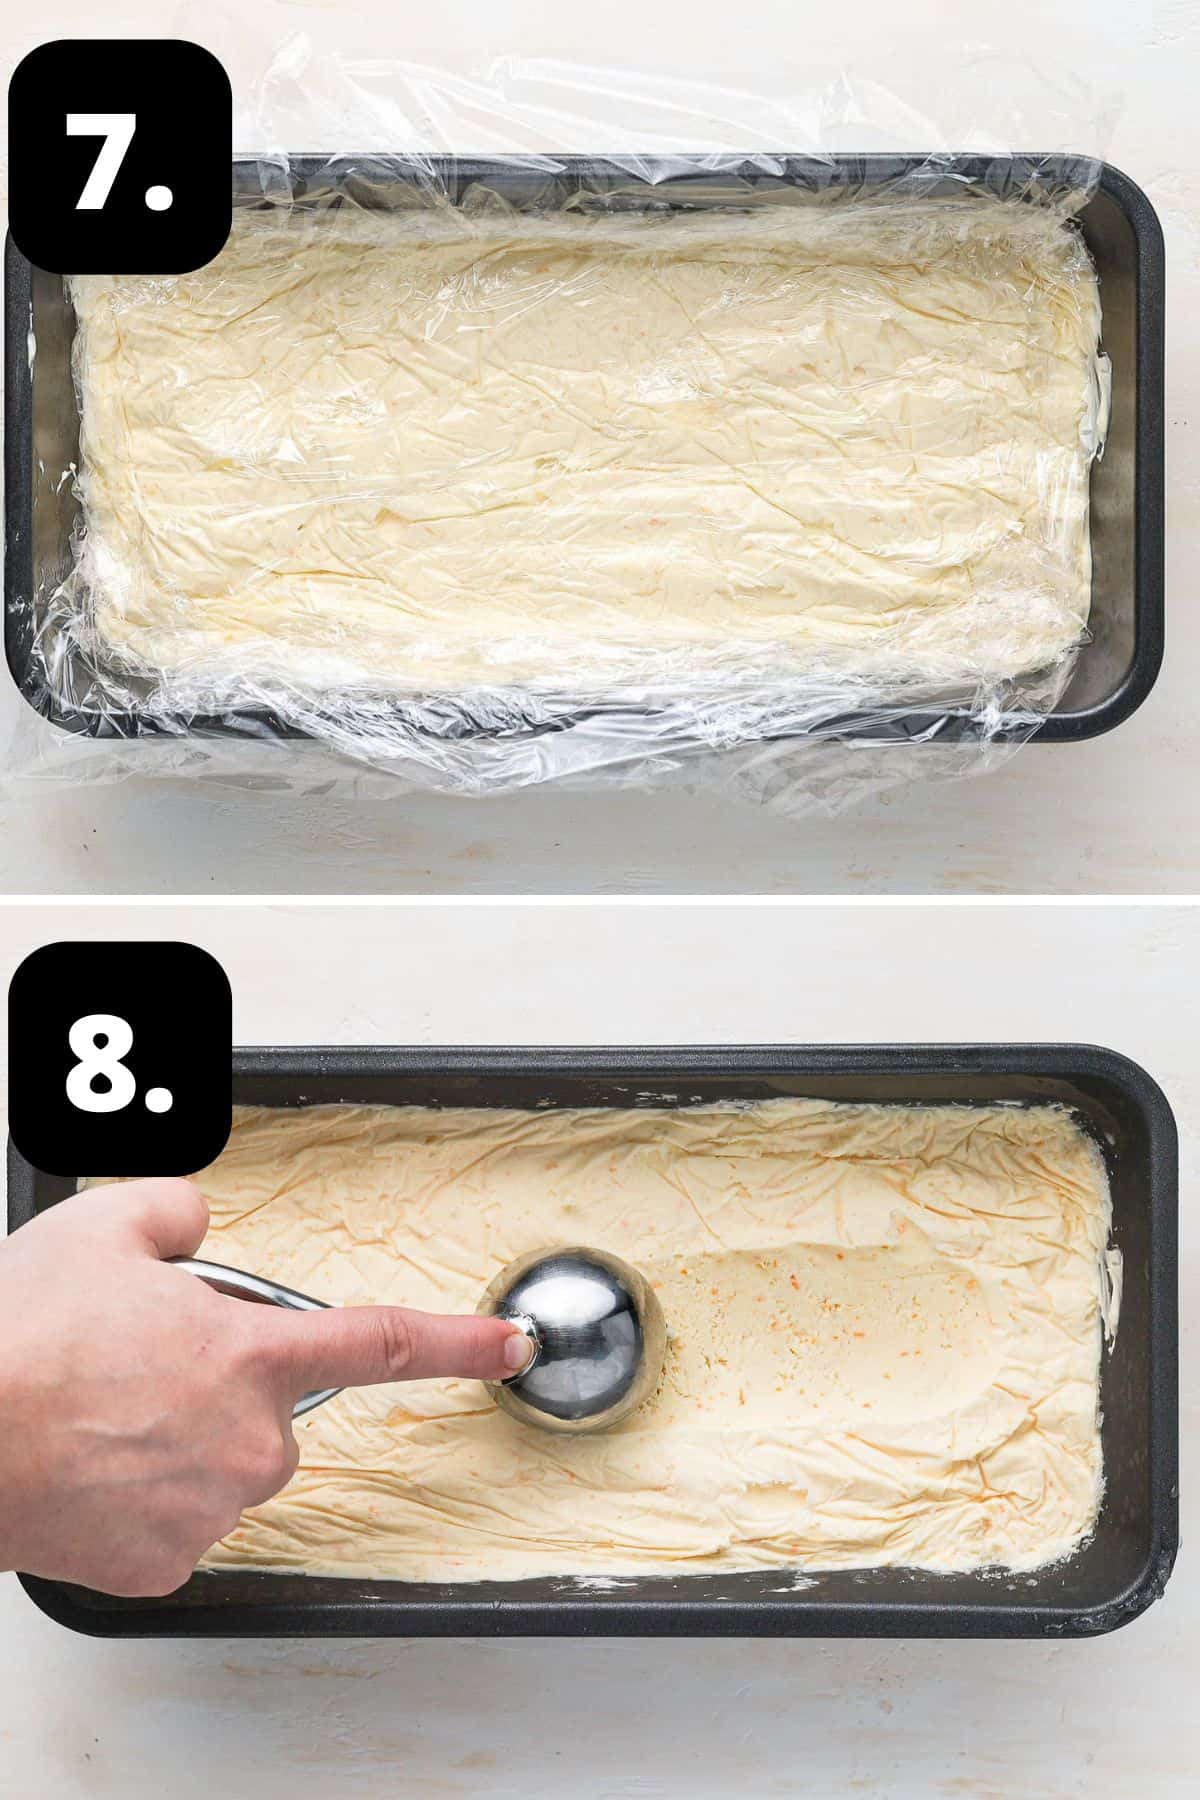 Steps 7-8 of preparing this recipe - topping the dish with cling film ready to freeze and scooping the frozen ice cream.